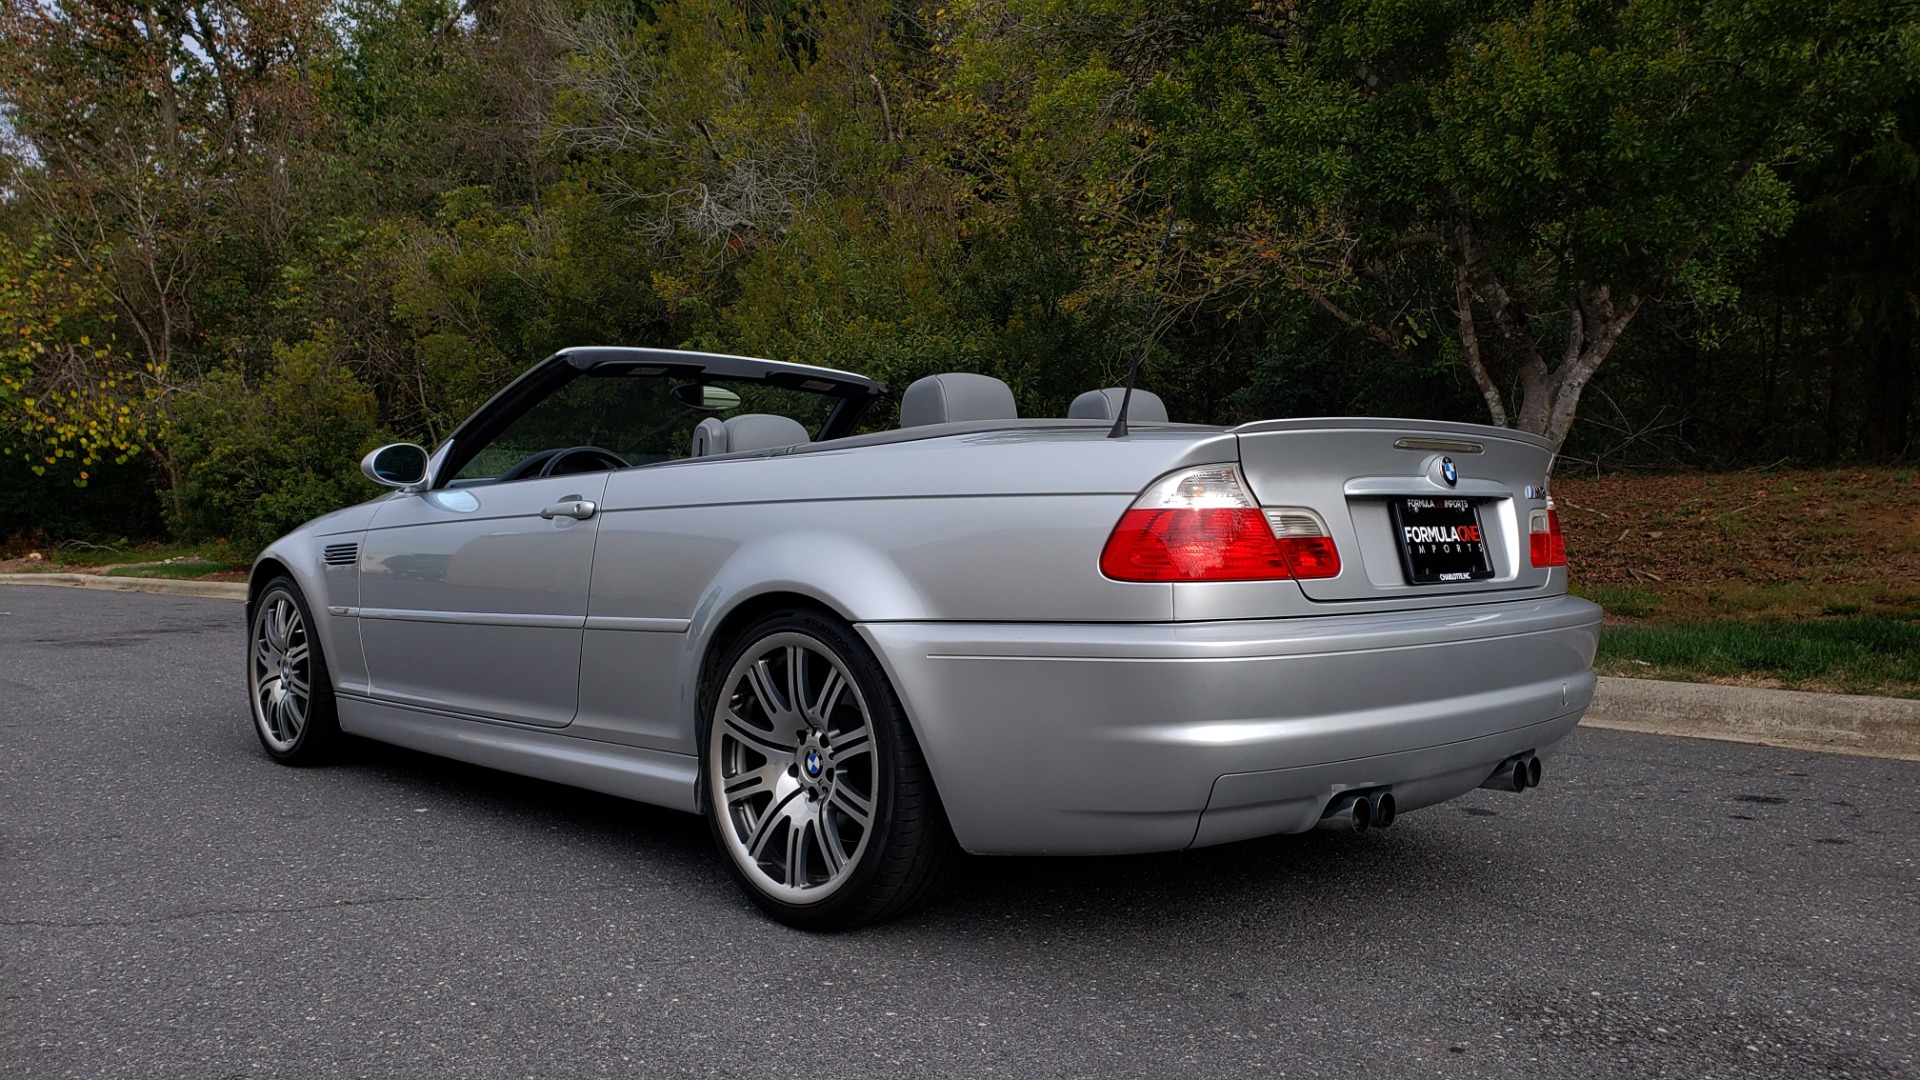 Used 2002 BMW M3 CONVERTIBLE / 6-SPD MAN / XENON / 19IN WHEELS for sale Sold at Formula Imports in Charlotte NC 28227 4